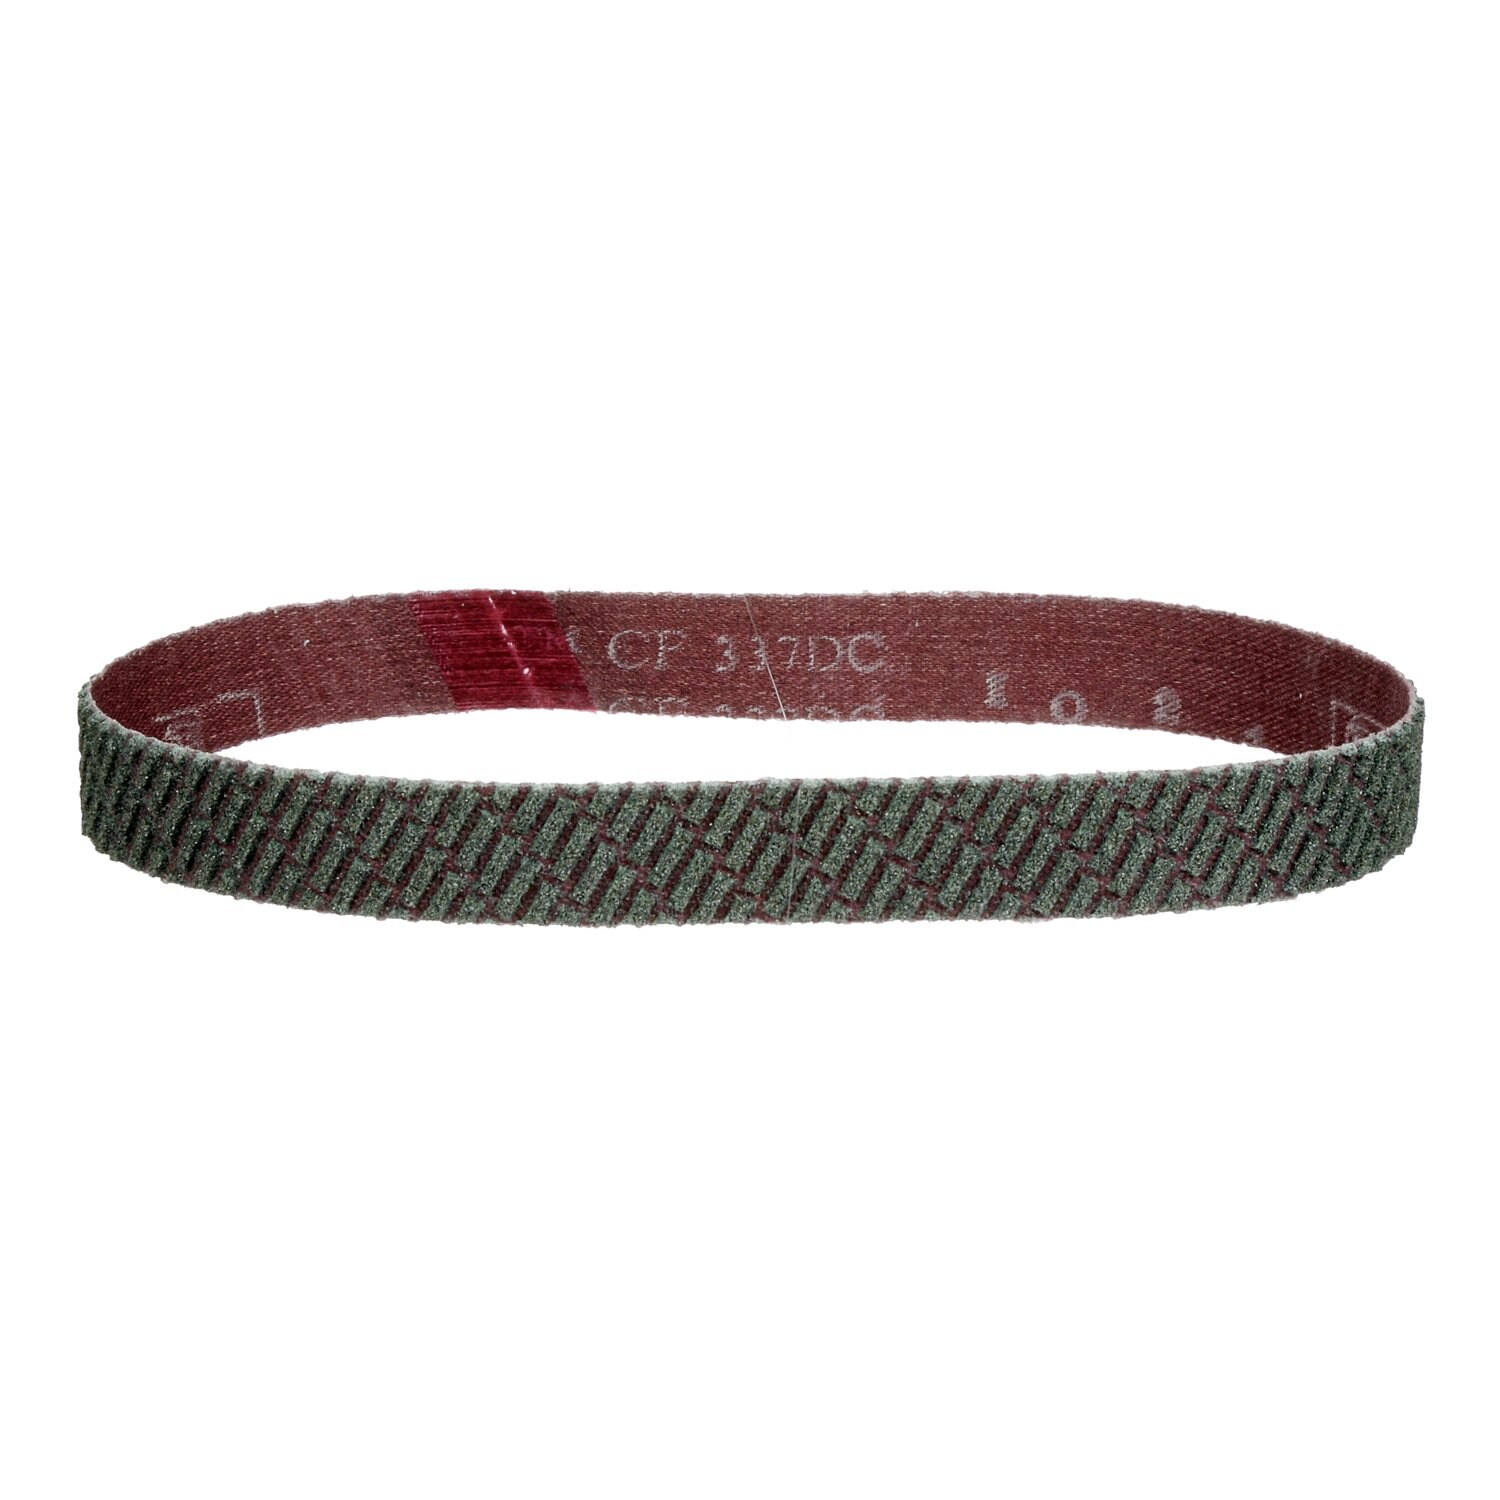 7100089192 - 3M Trizact Cloth Belt 337DC, 1/2 in X 18 in A300 X-weight, 20 ea/Case